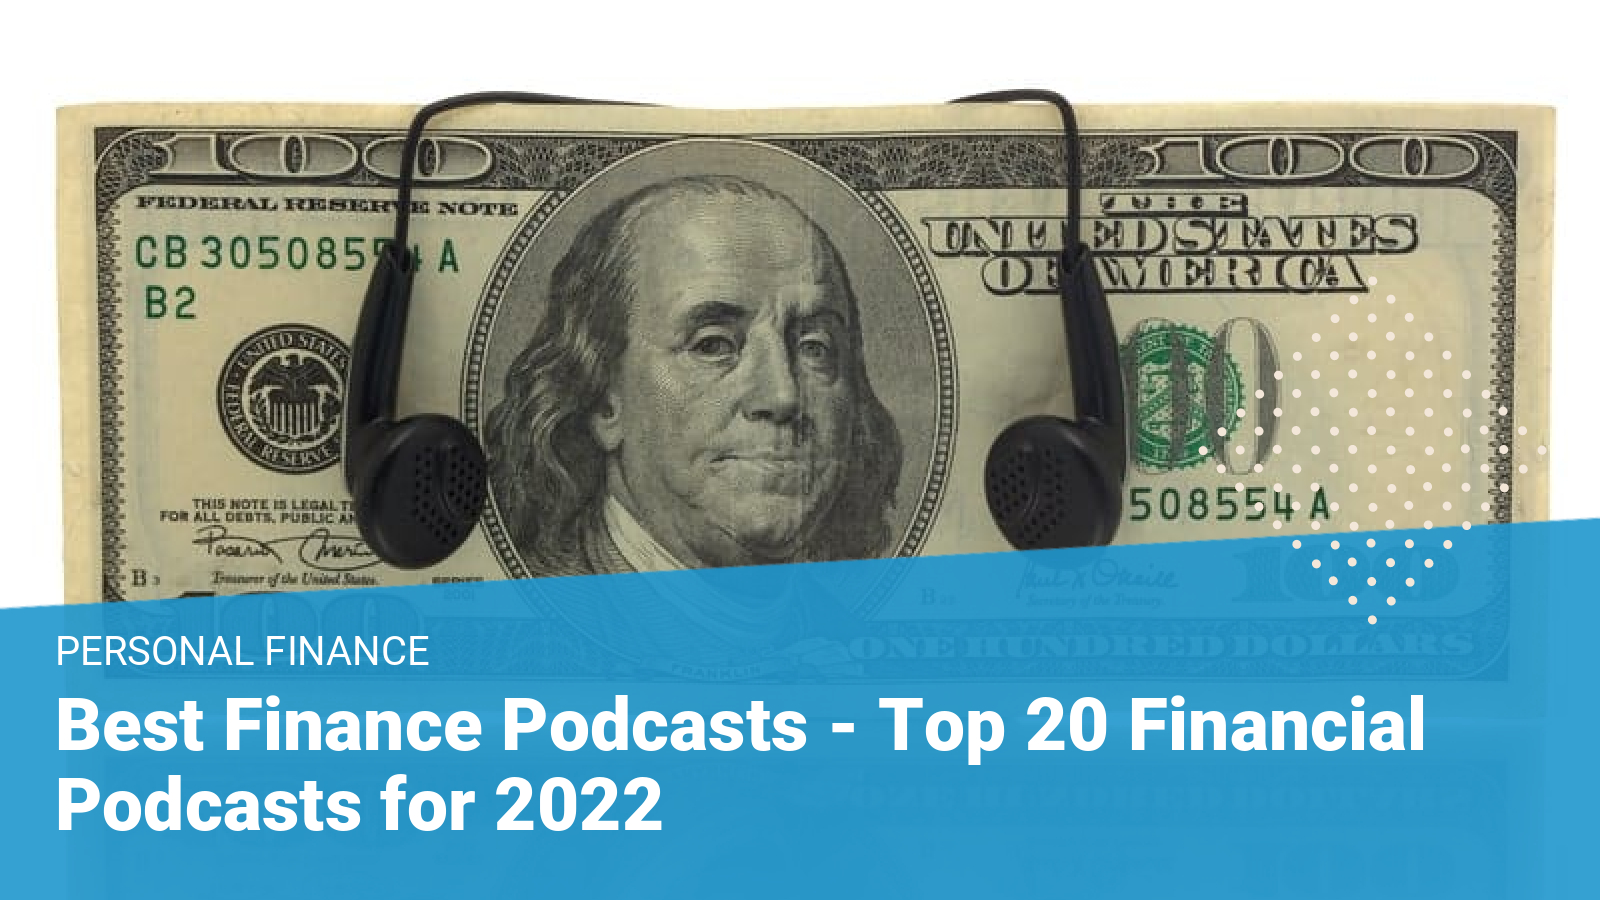 Finance Podcasts the best for 2020